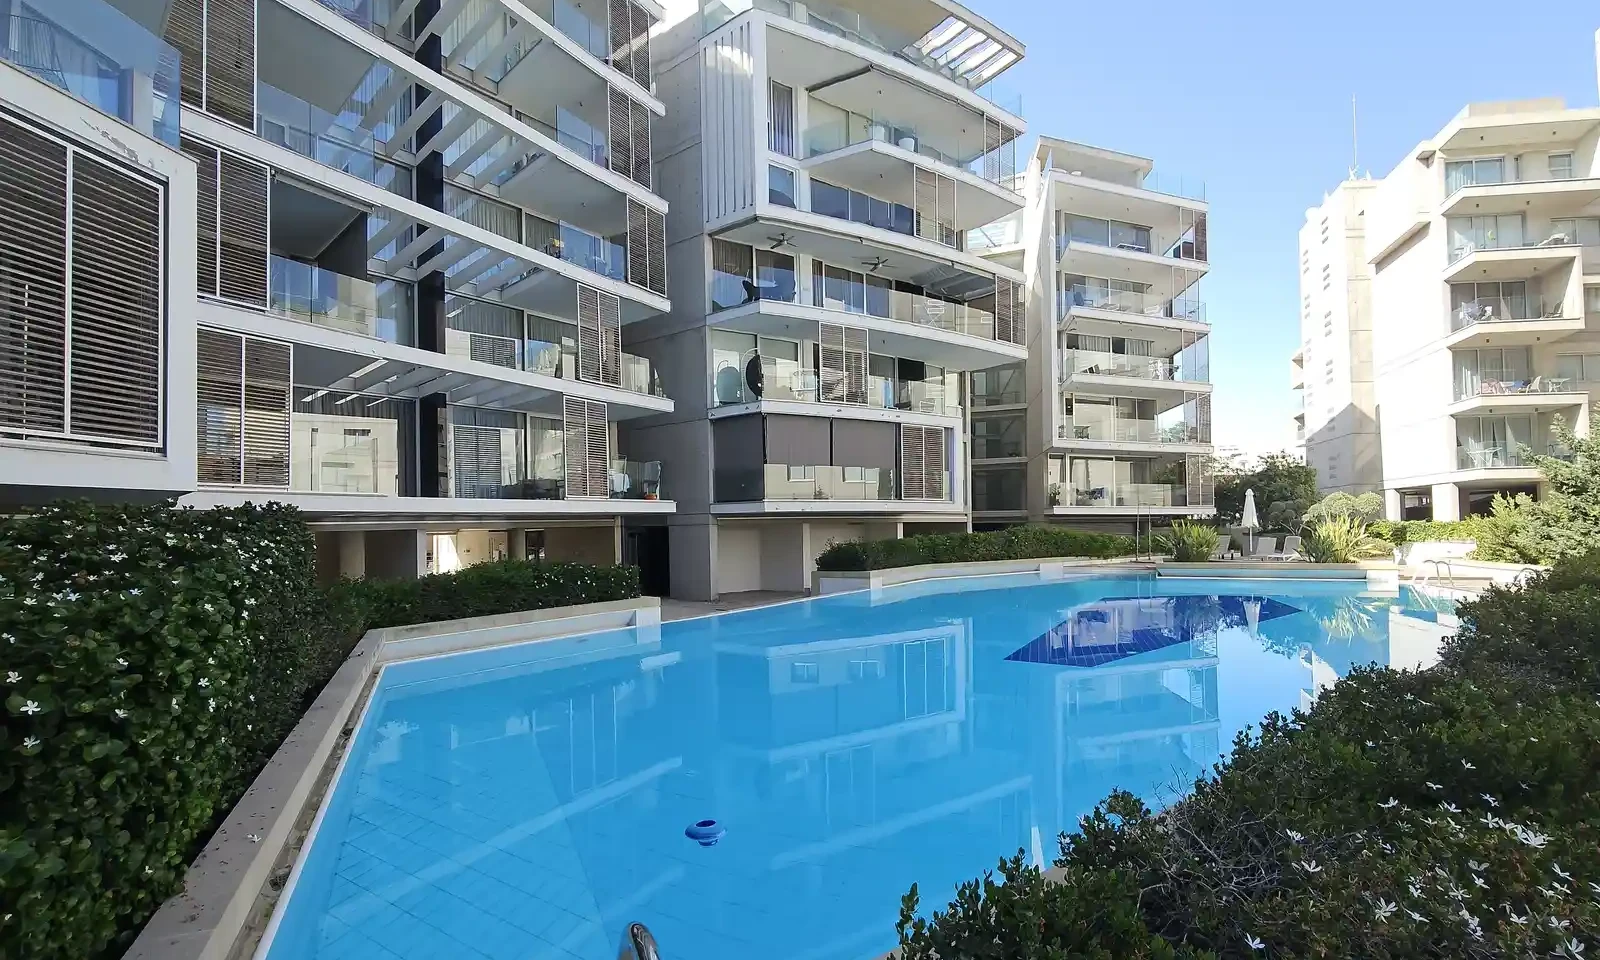 2-bedroom apartment fоr sаle €560.000, image 1